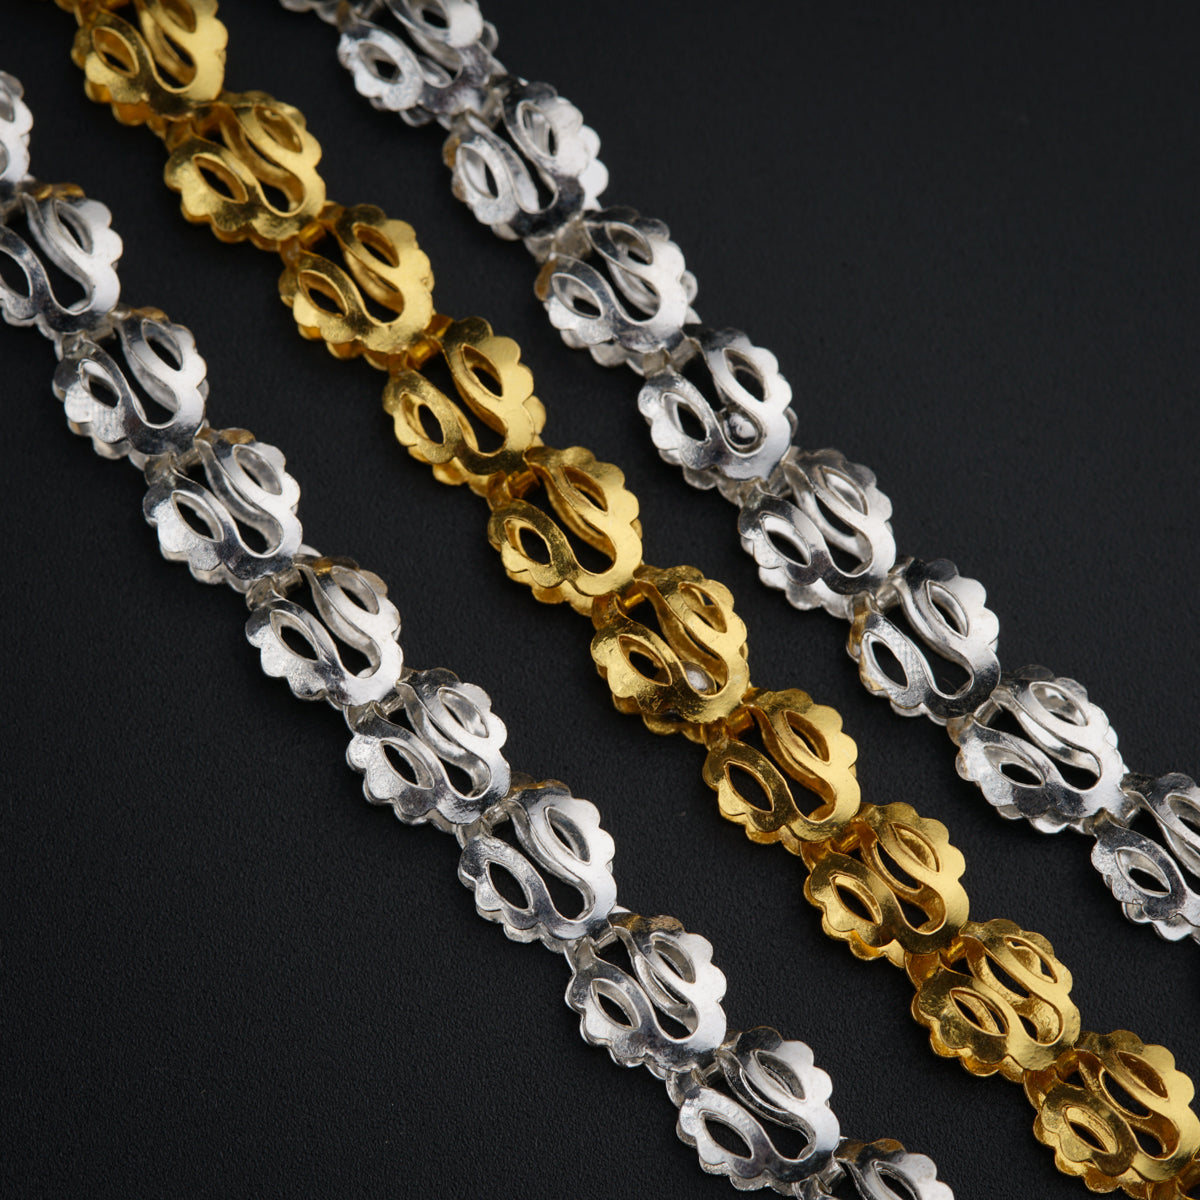 a close up of a chain of gold, silver, and black beads